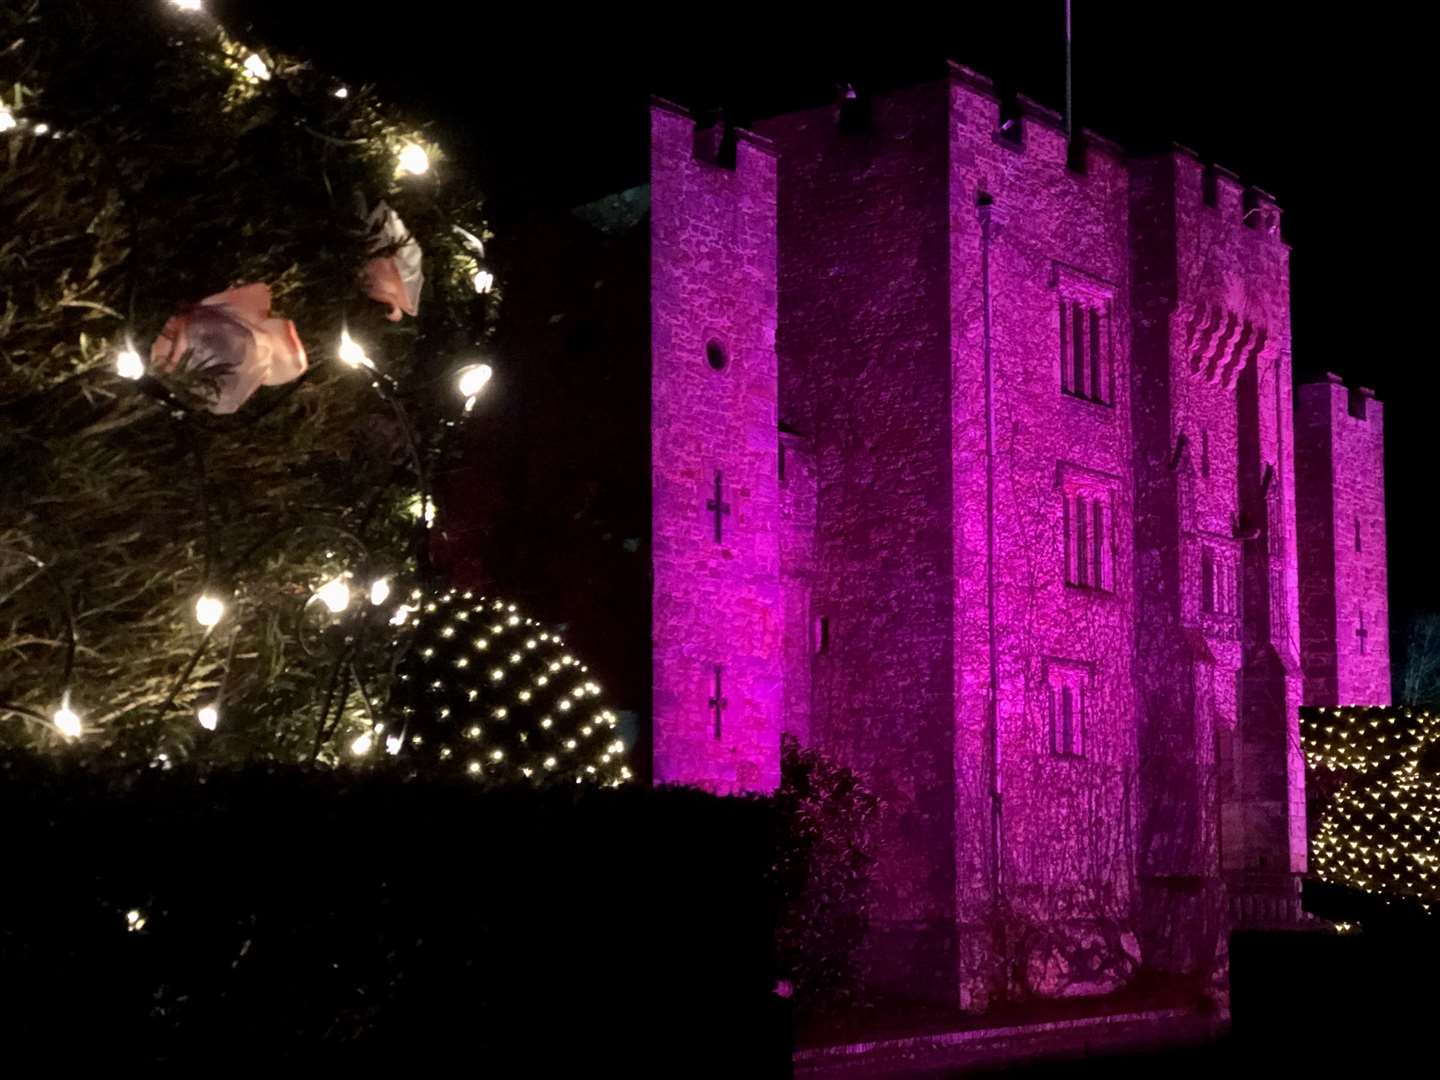 Christmas at Hever Castle has begun, but due to the current lockdown, it is the outdoor areas that remain open at present.